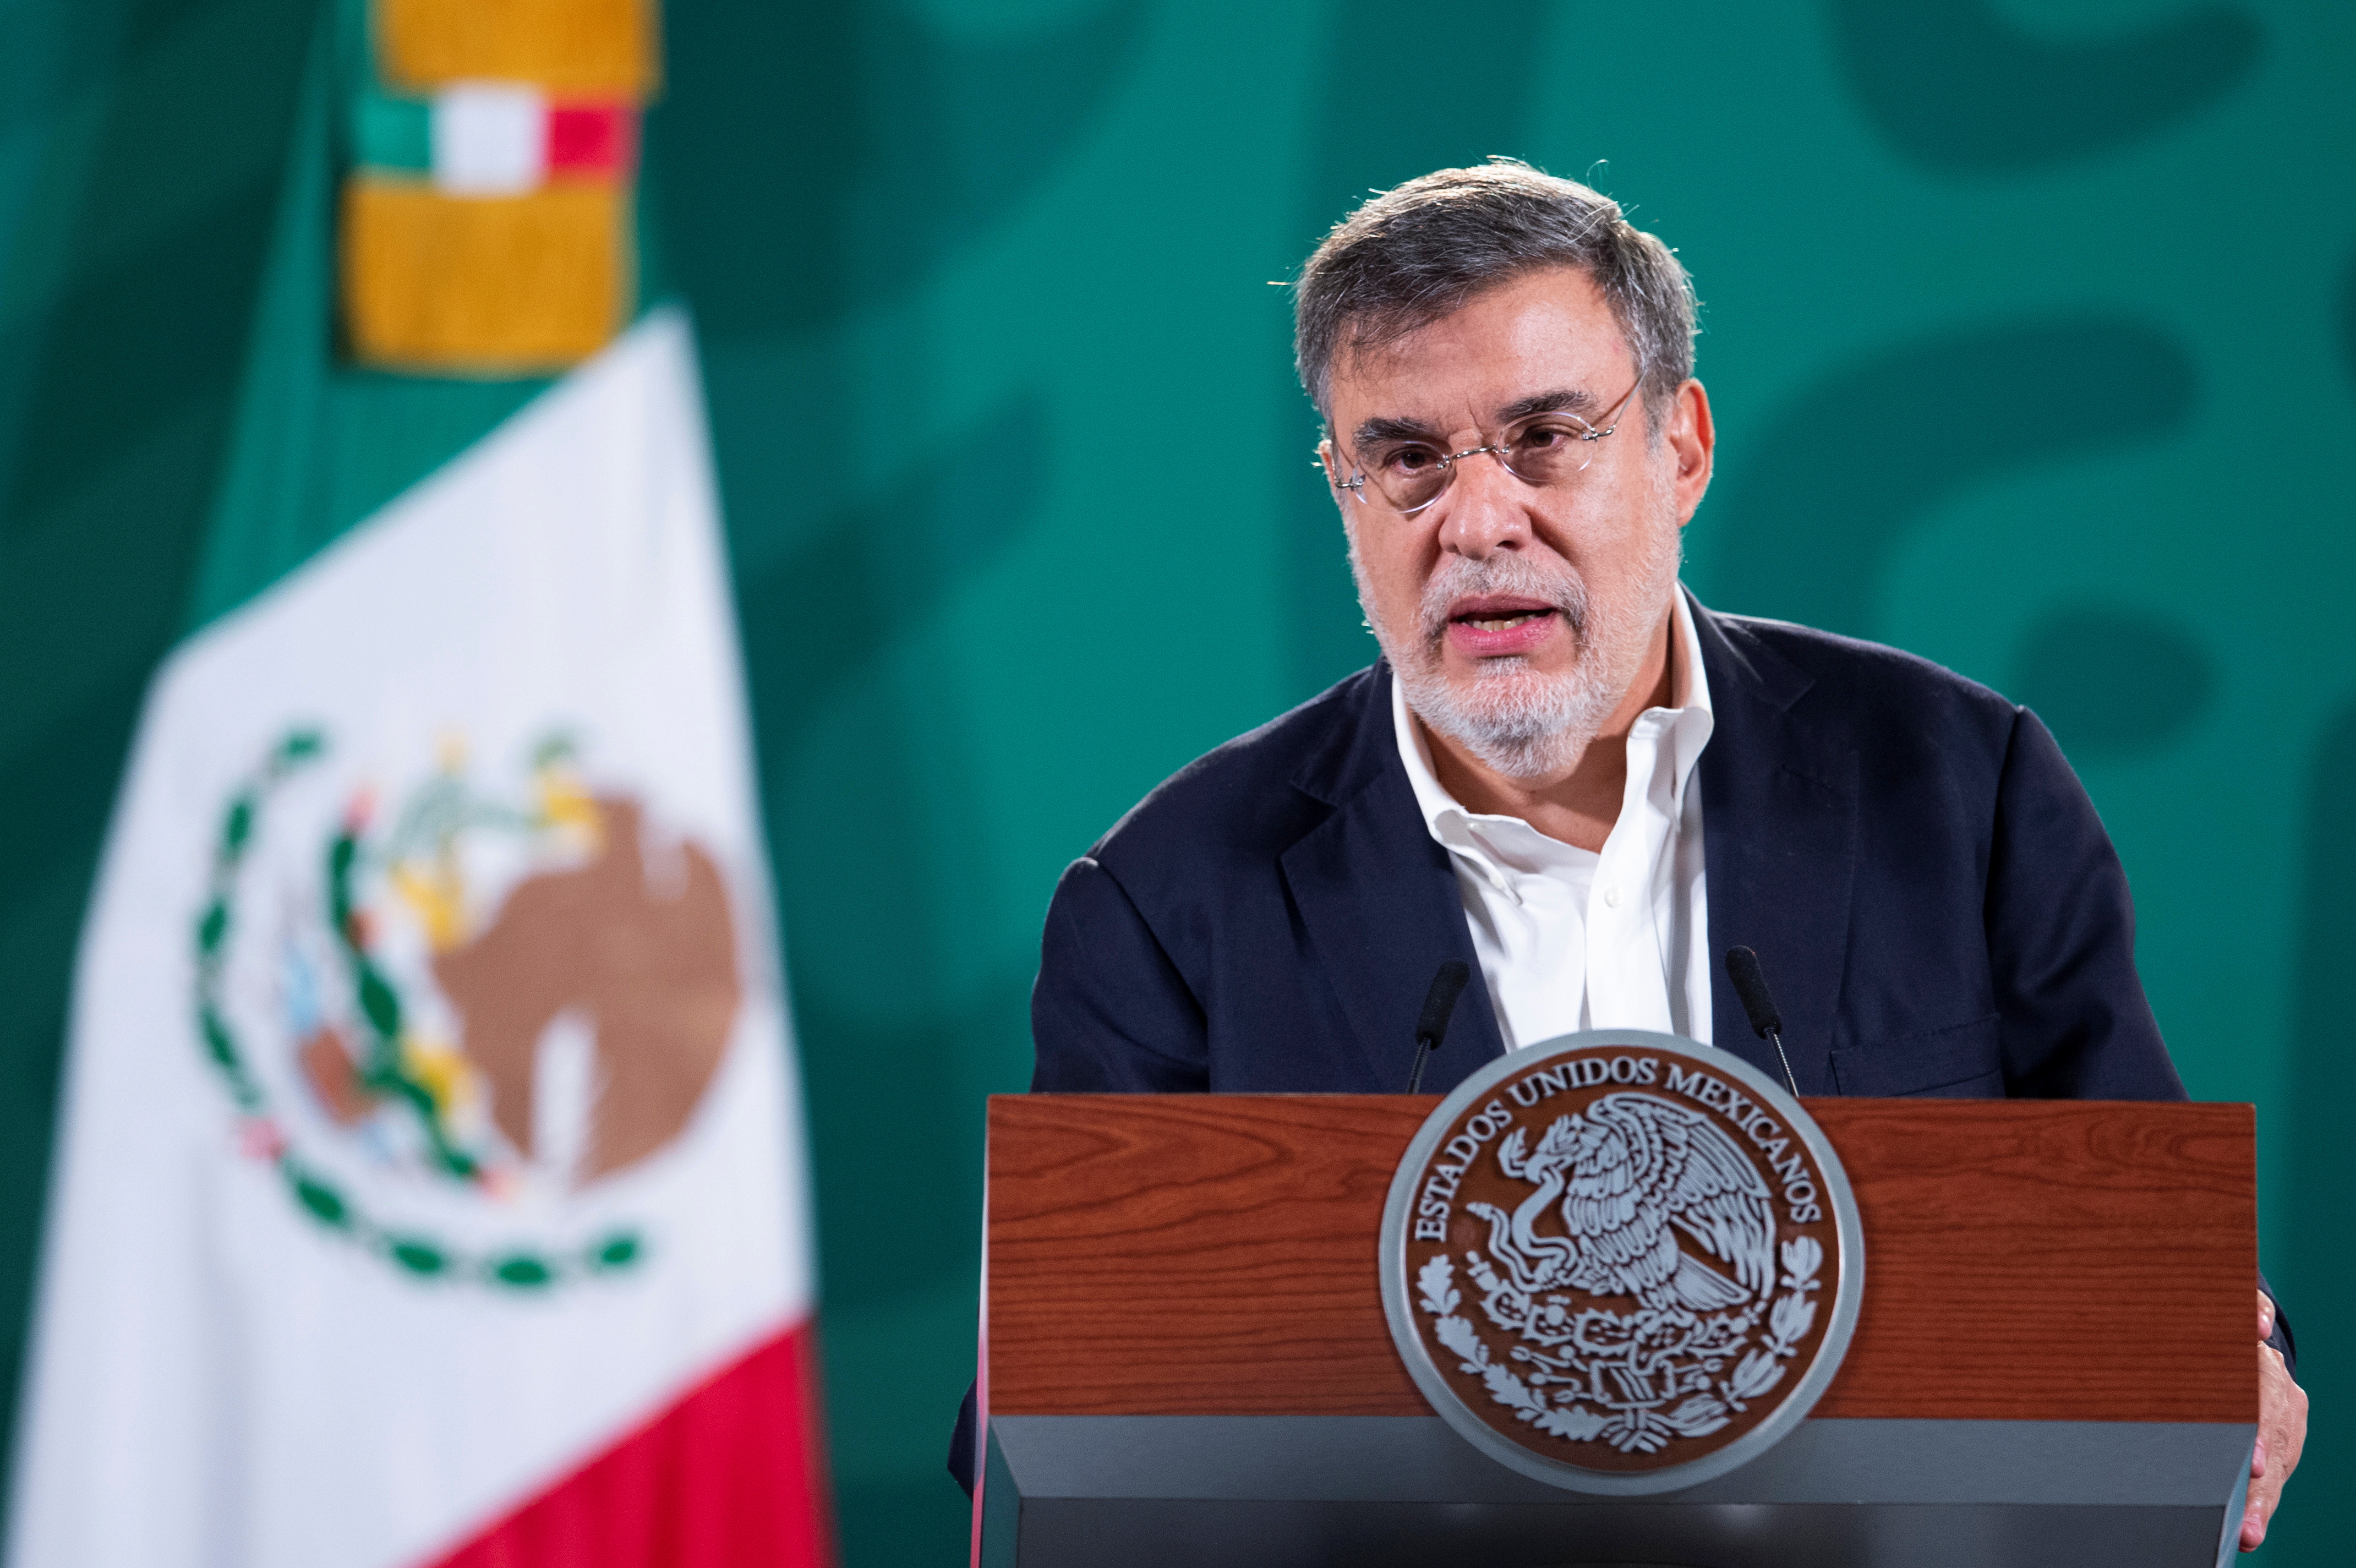 Julio Scherer, who is stepping down as counsel and close advisor to Mexican President Andres Manuel Lopez Obrador, speaks during the president's news conference at the National Palace in Mexico City, Mexico September 2, 2021. Mexico's Presidency/Handout via REUTERS ATTENTION EDITORS - THIS IMAGE HAS BEEN SUPPLIED BY A THIRD PARTY. NO RESALES. NO ARCHIVES